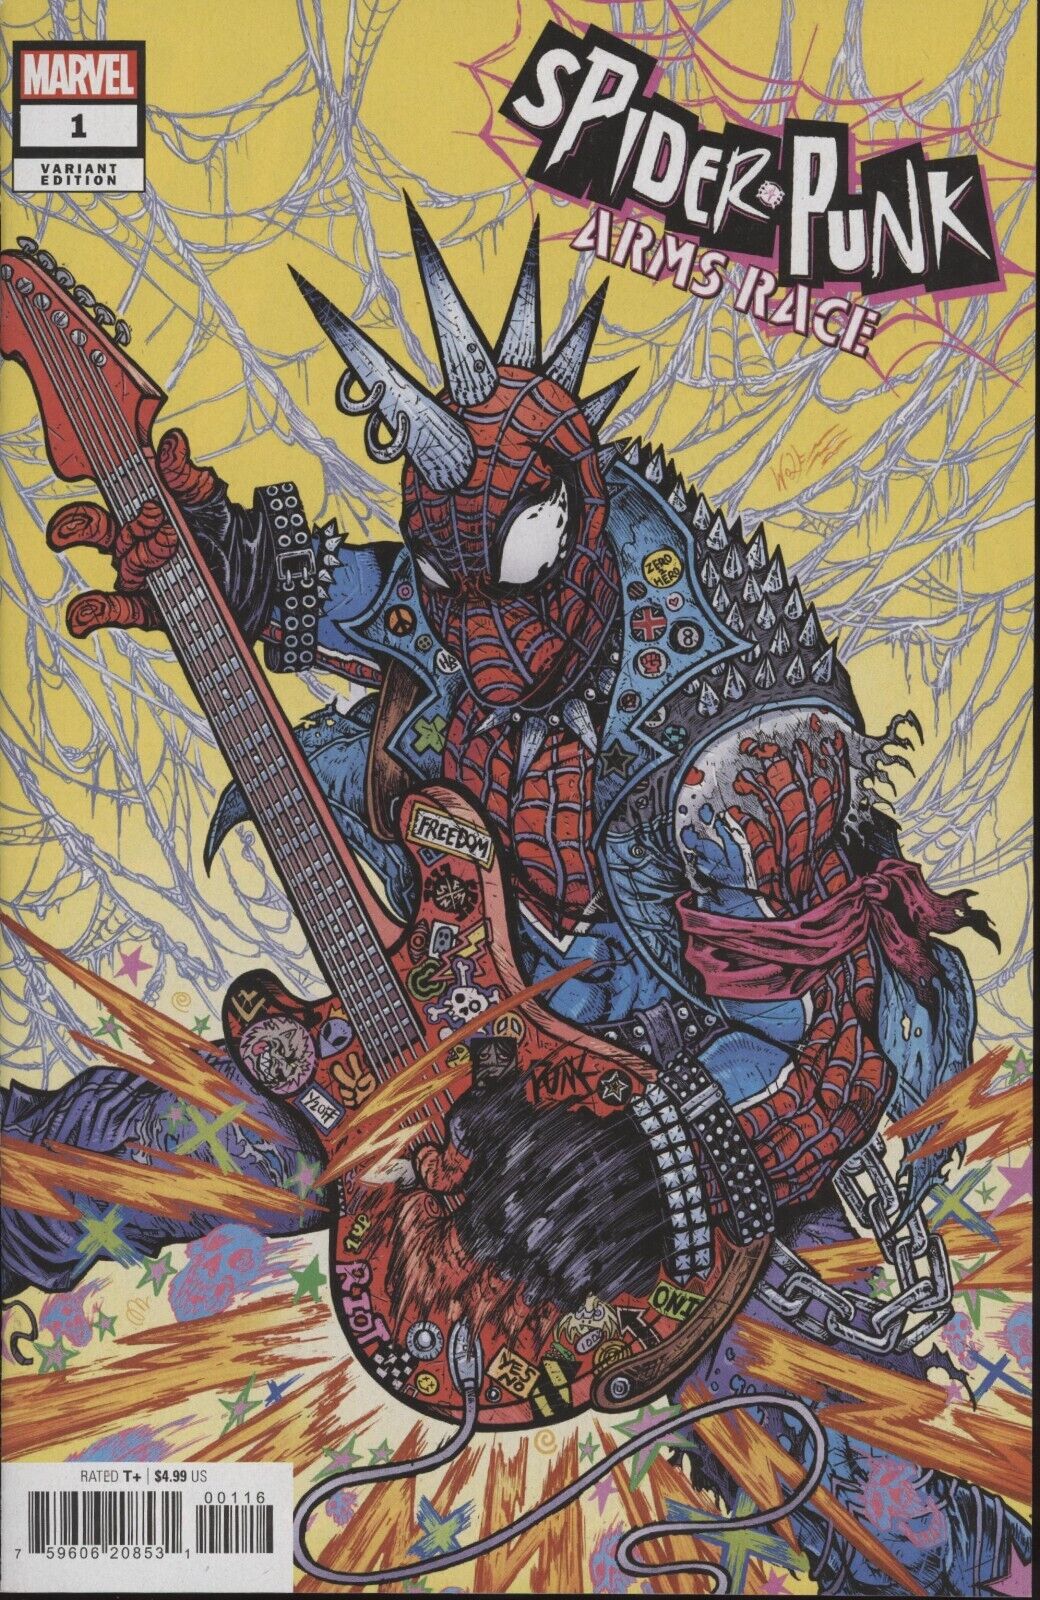 Spider-Punk Arms Race Issue #1F 1:25 Retailer Incentive Variant